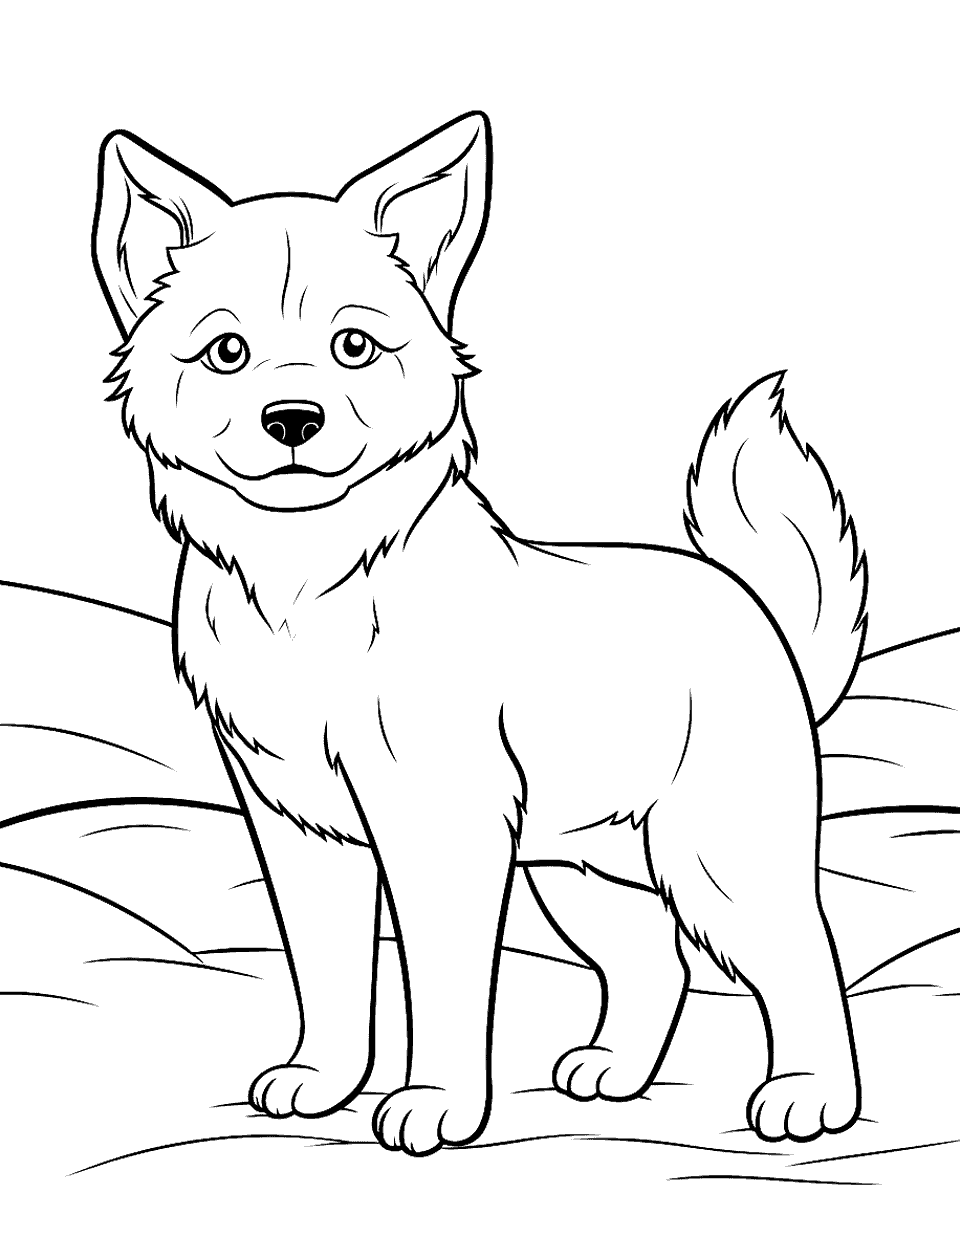 Sleek and Strong Husky in Snow Puppy Coloring Page - A Husky puppy looking out on a snowy landscape with detailed fur and expressive eyes.